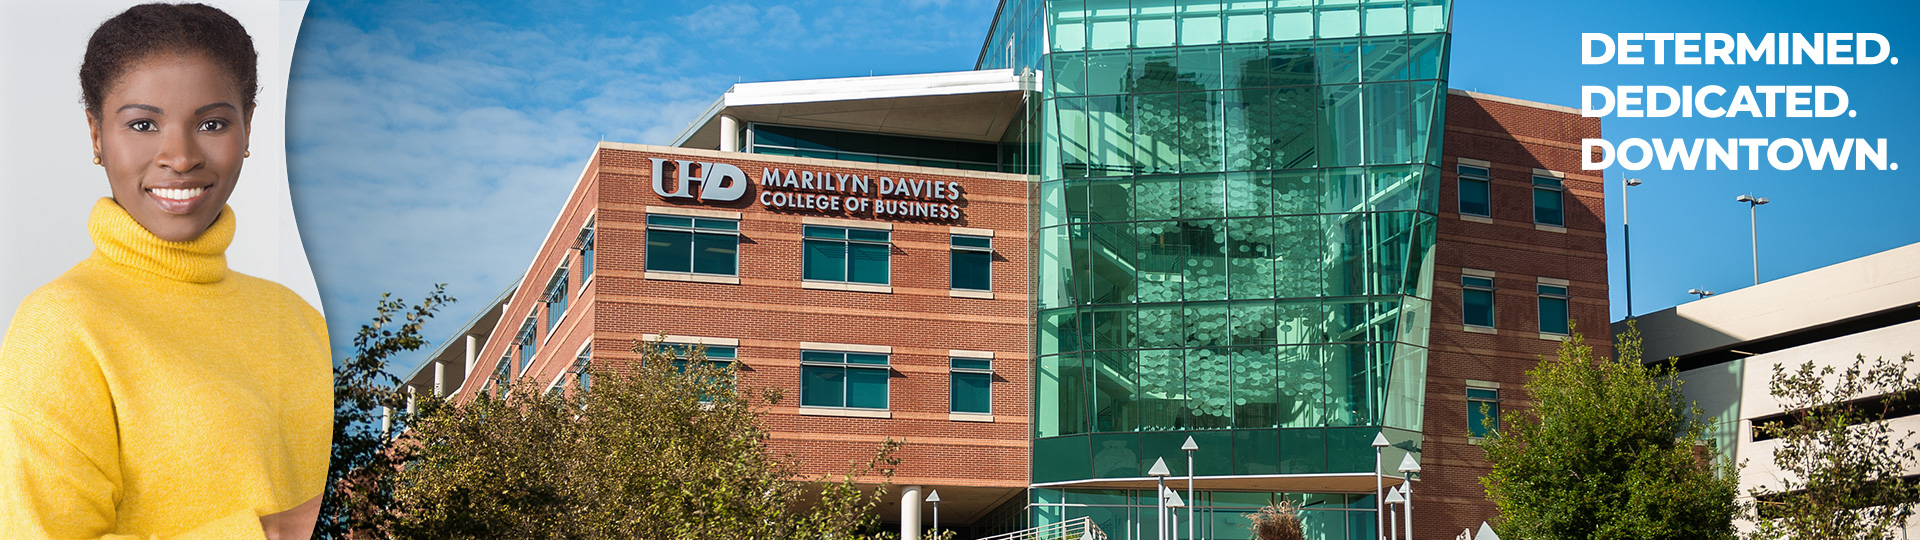 Student and view of Marilyn Davies College of Business